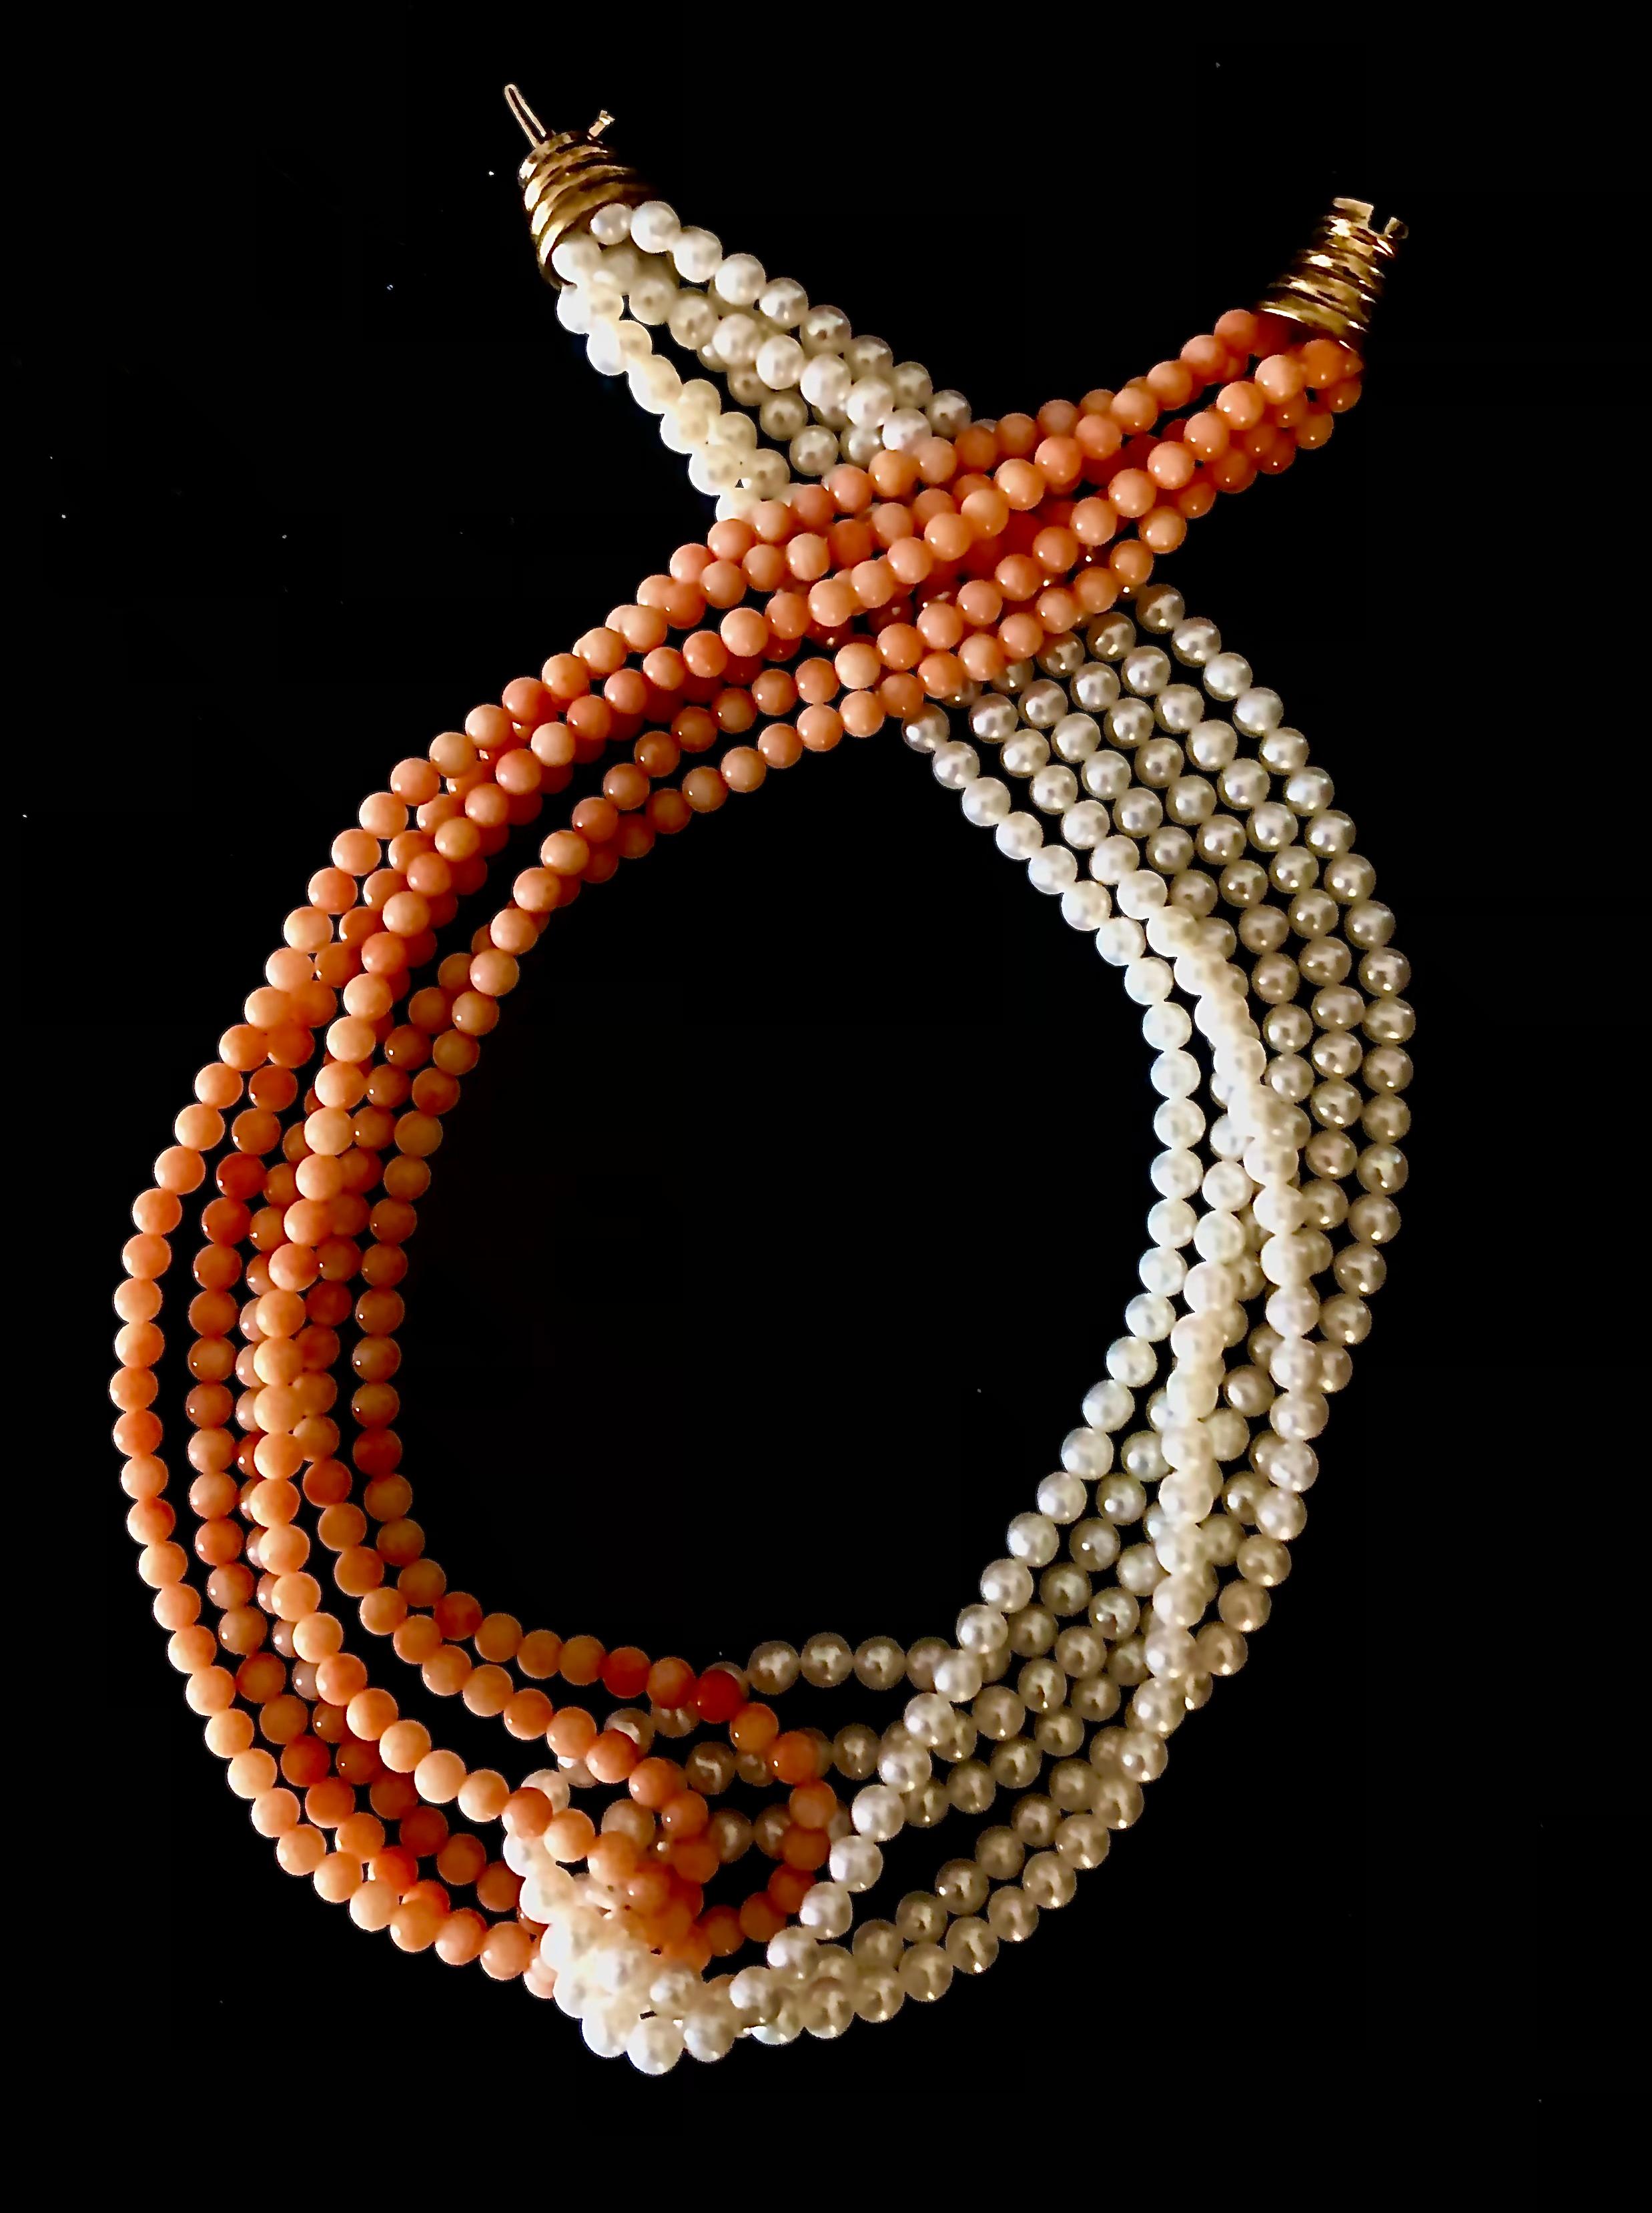 This is an interesting necklace comprised of twin six strands of peachy pink 4.1mm coral beads on one side and six strands of 4.3mm cultured pearls on the other which intersect in the middle. This combination produces a stunning effect.

The pearls